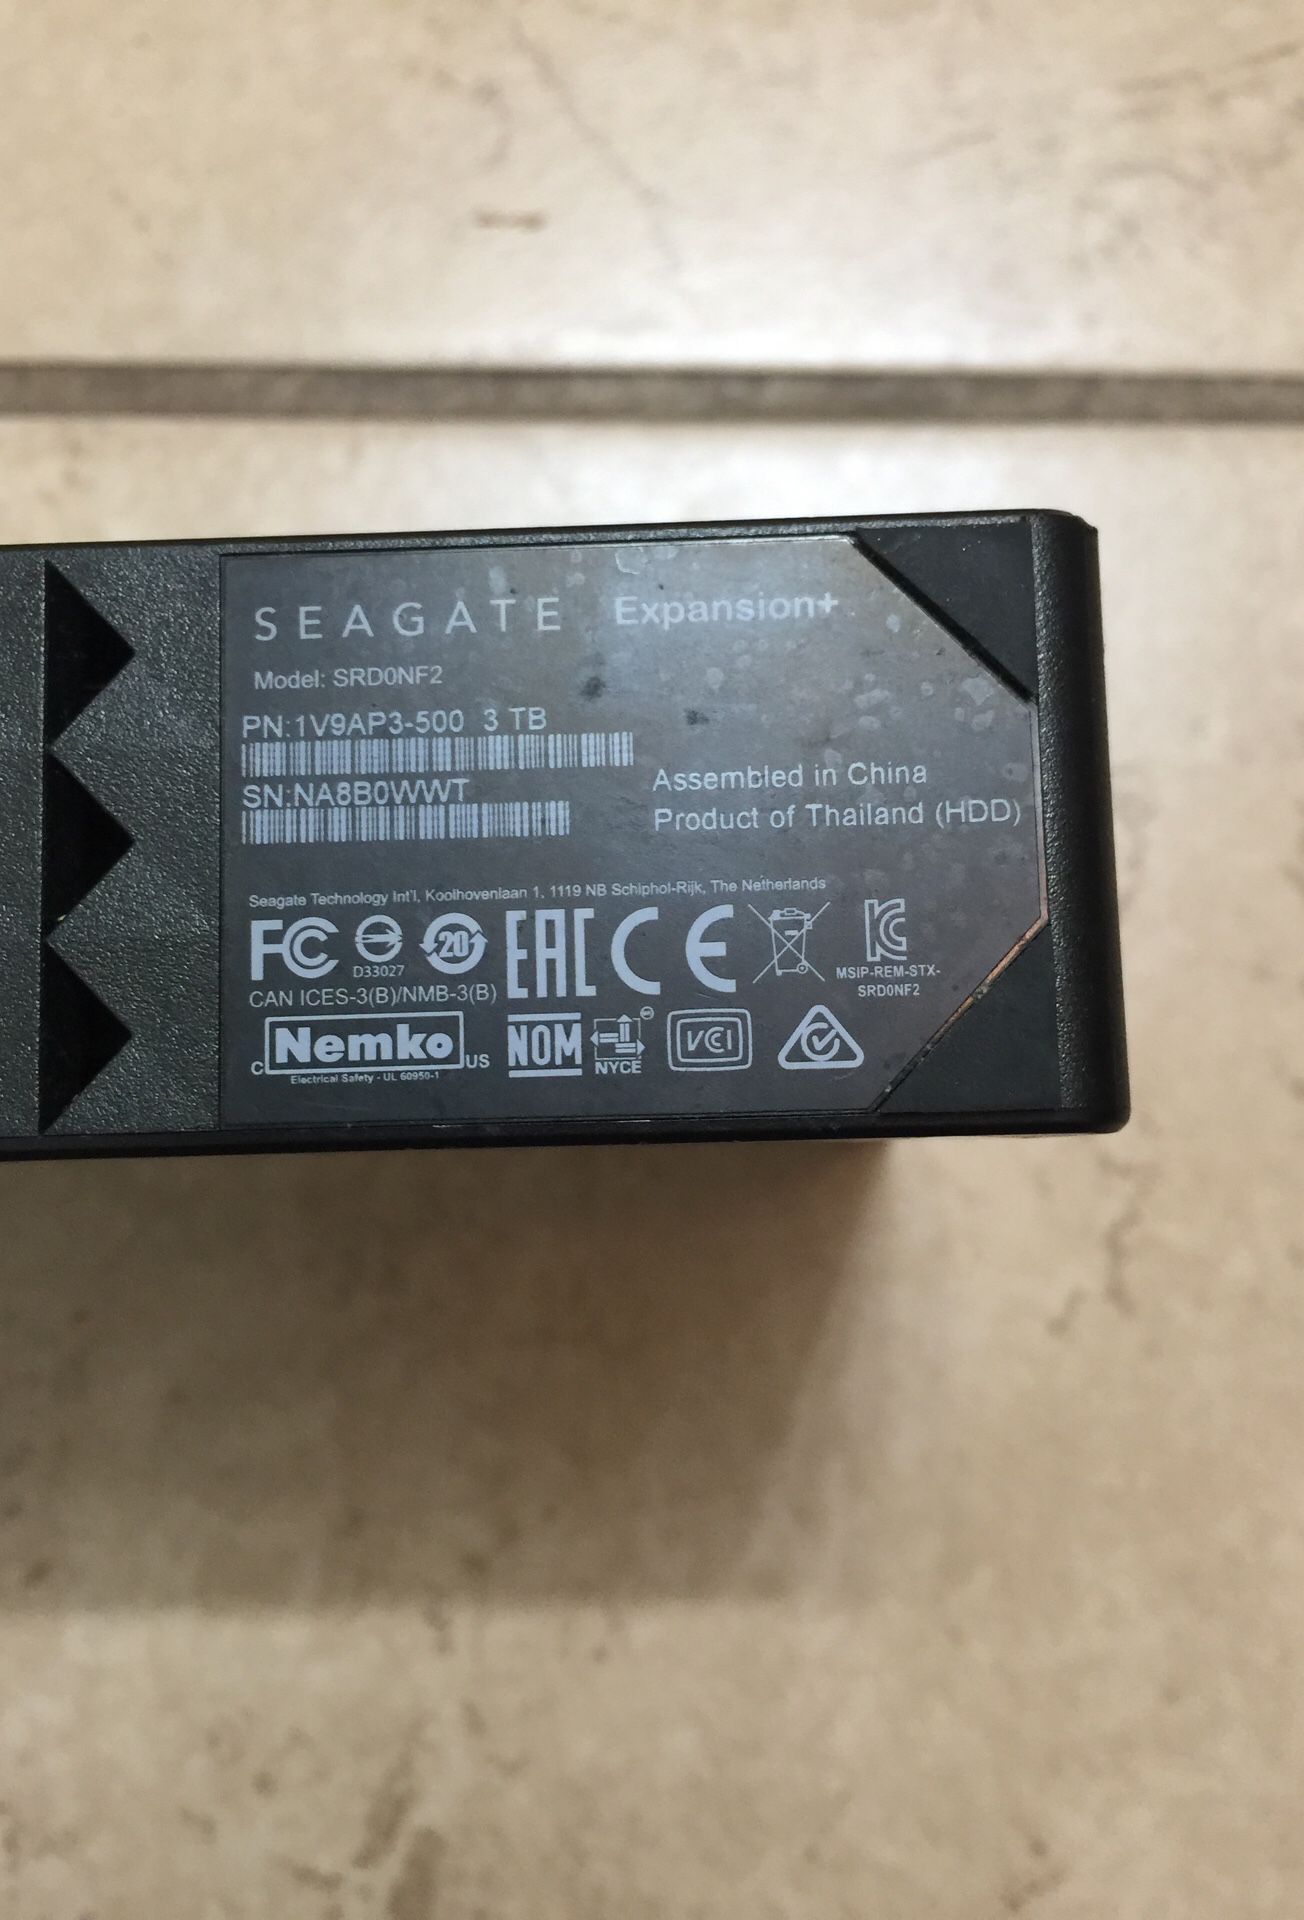 Seagate expansion+ external hard drive 3tb barely used